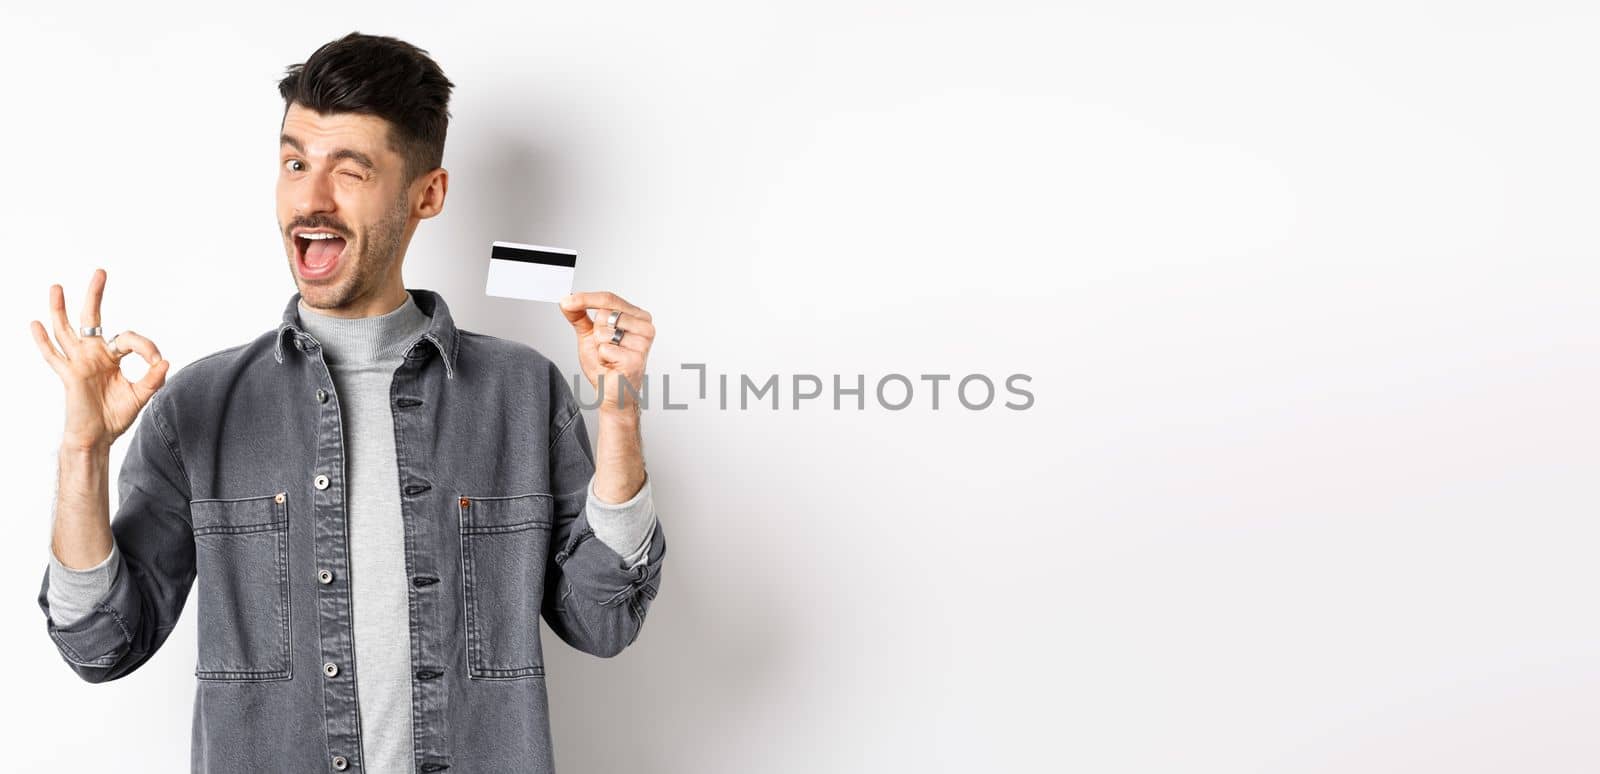 Very good. Smiling guy with plastic credit card showing okay sign, smiling and winking satisfied, recommend bank, standing on white background.